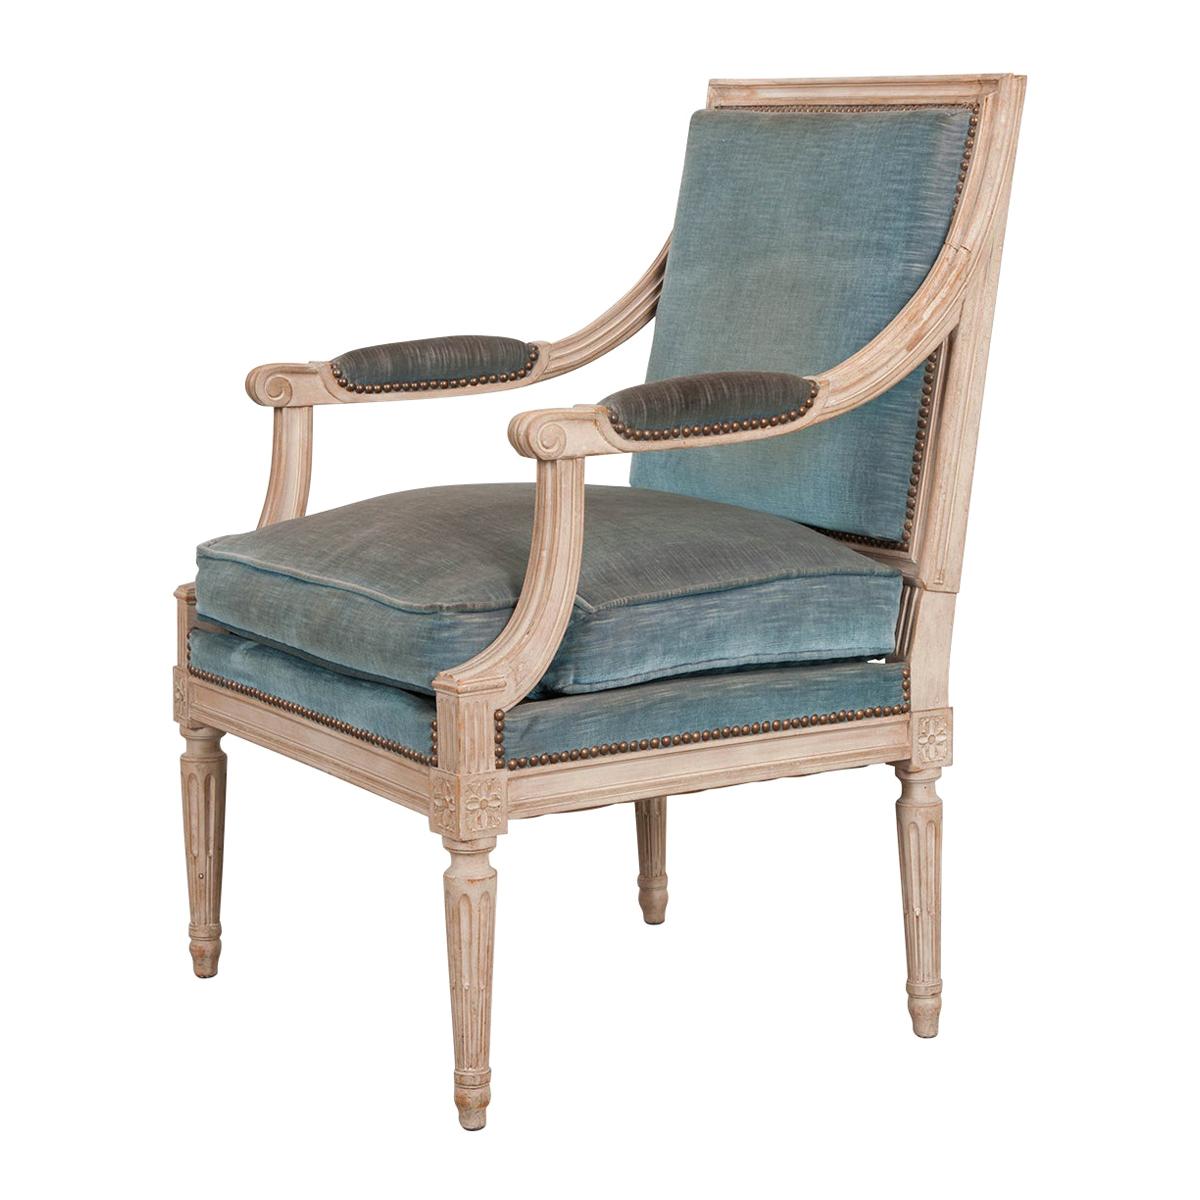 French 19th Century Louis XVI-Style Painted Fauteuil